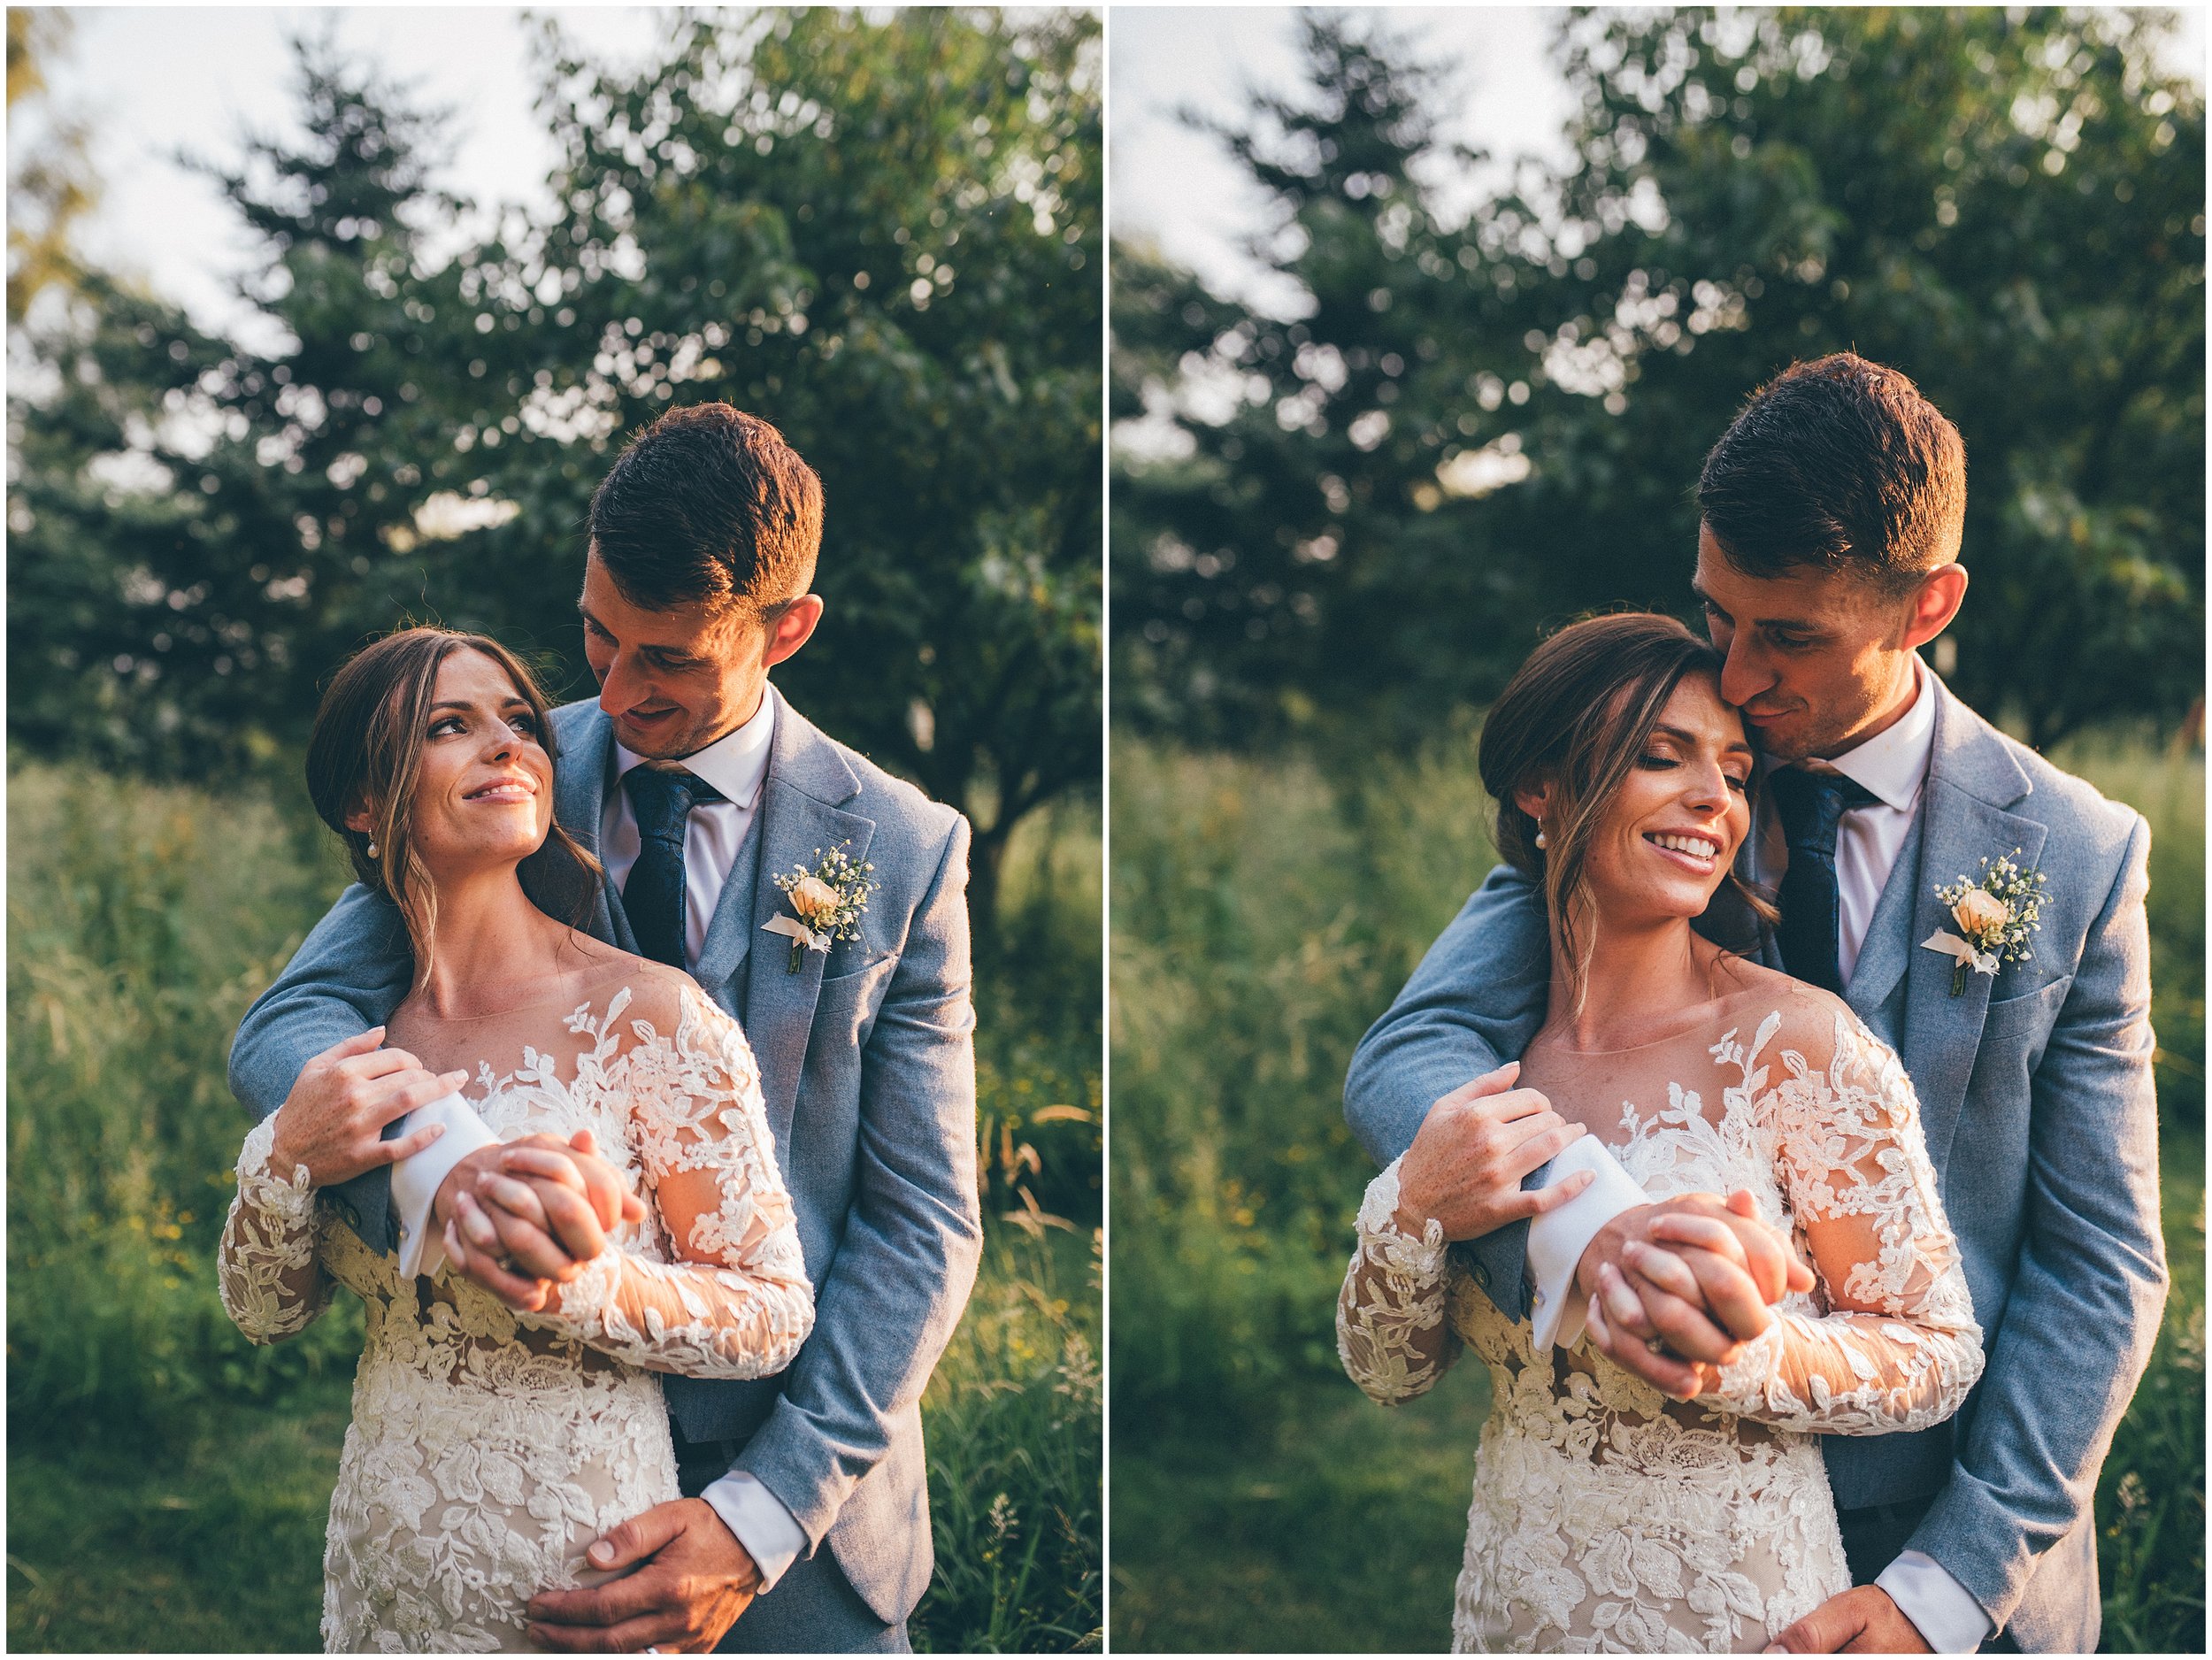 New husband and wife have portraits taken during golden hour at their wedding venue with the wedding photographer, Helen Jane Smiddy Photography.